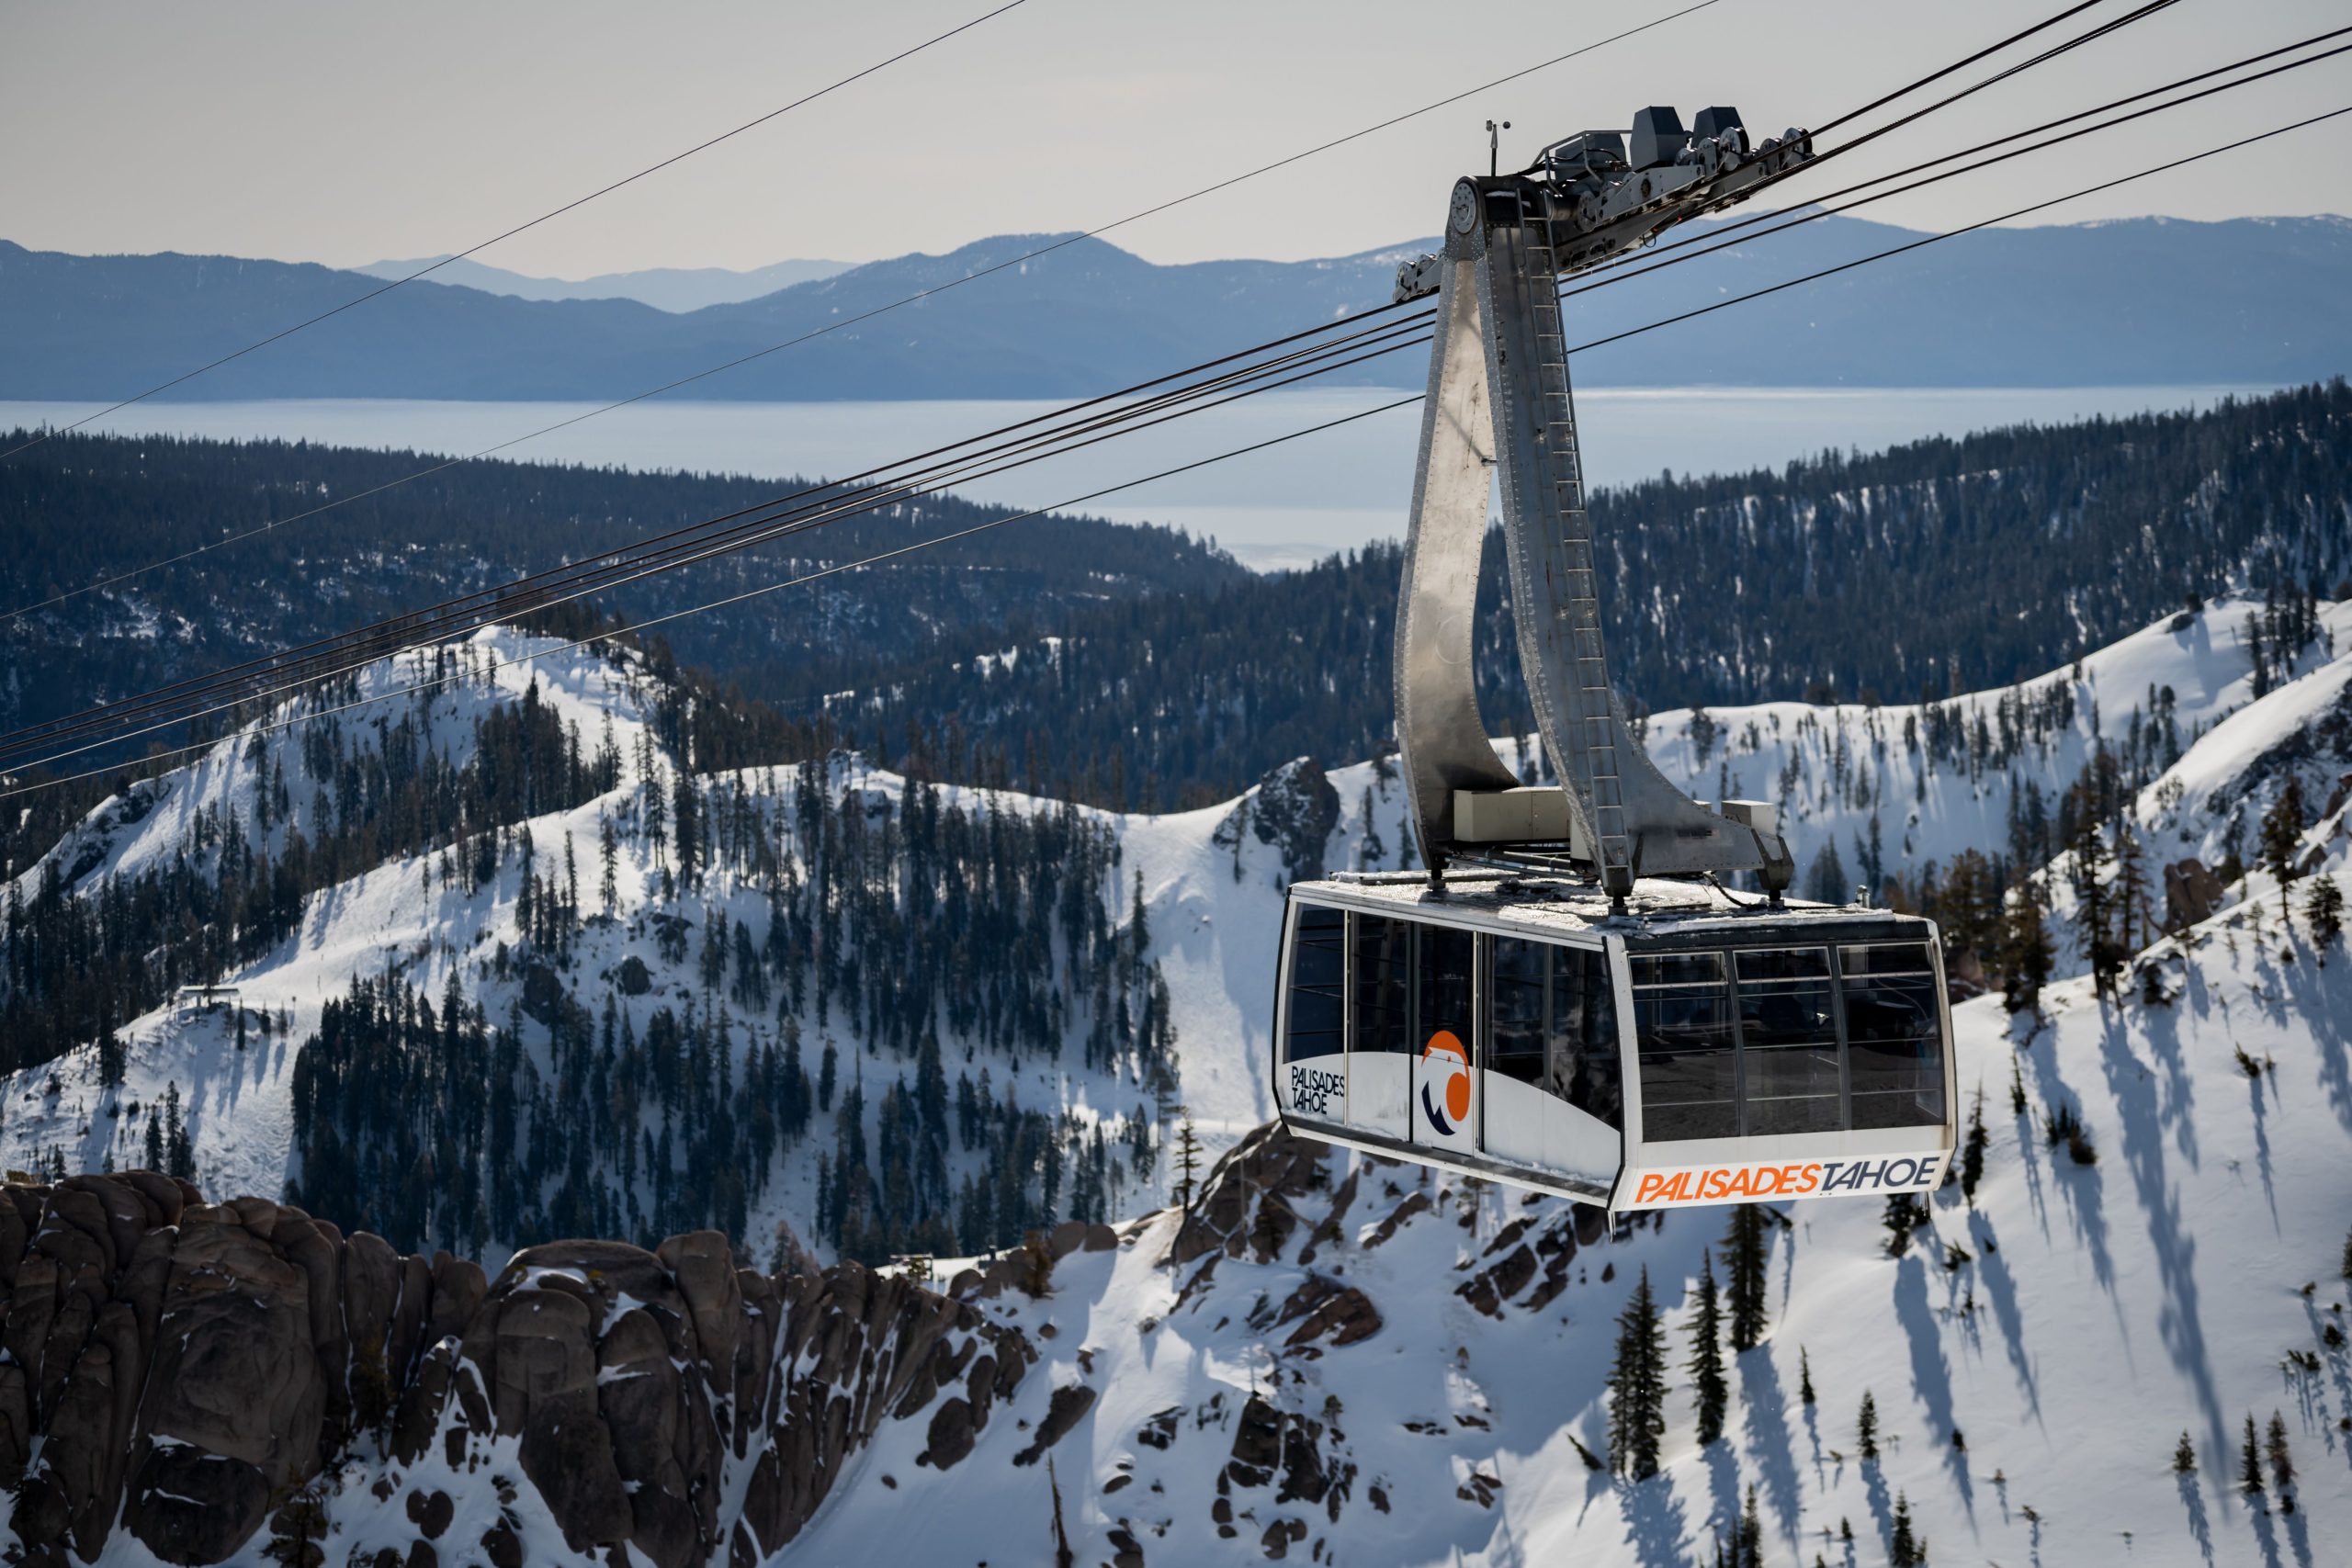 Palisades Tahoe, CA, Now The Only Ski Resort Still Open in Lake Tahoe